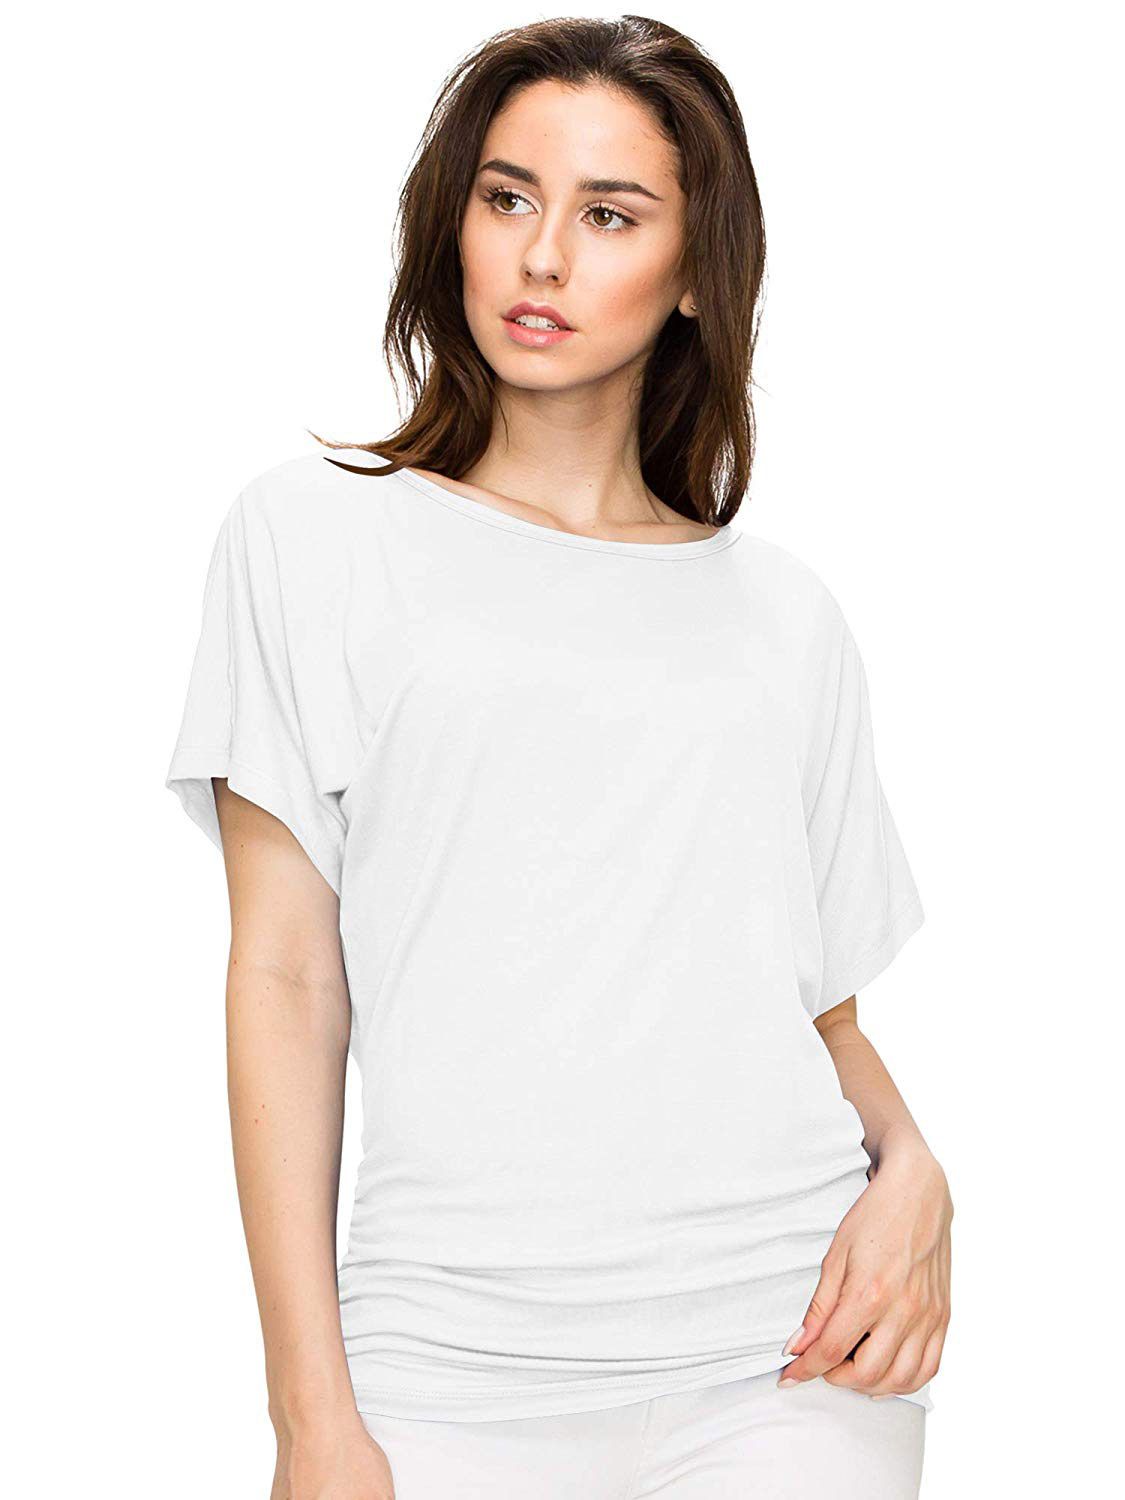 8 Best White T-Shirts You Can Buy on Amazon | PEOPLE.com